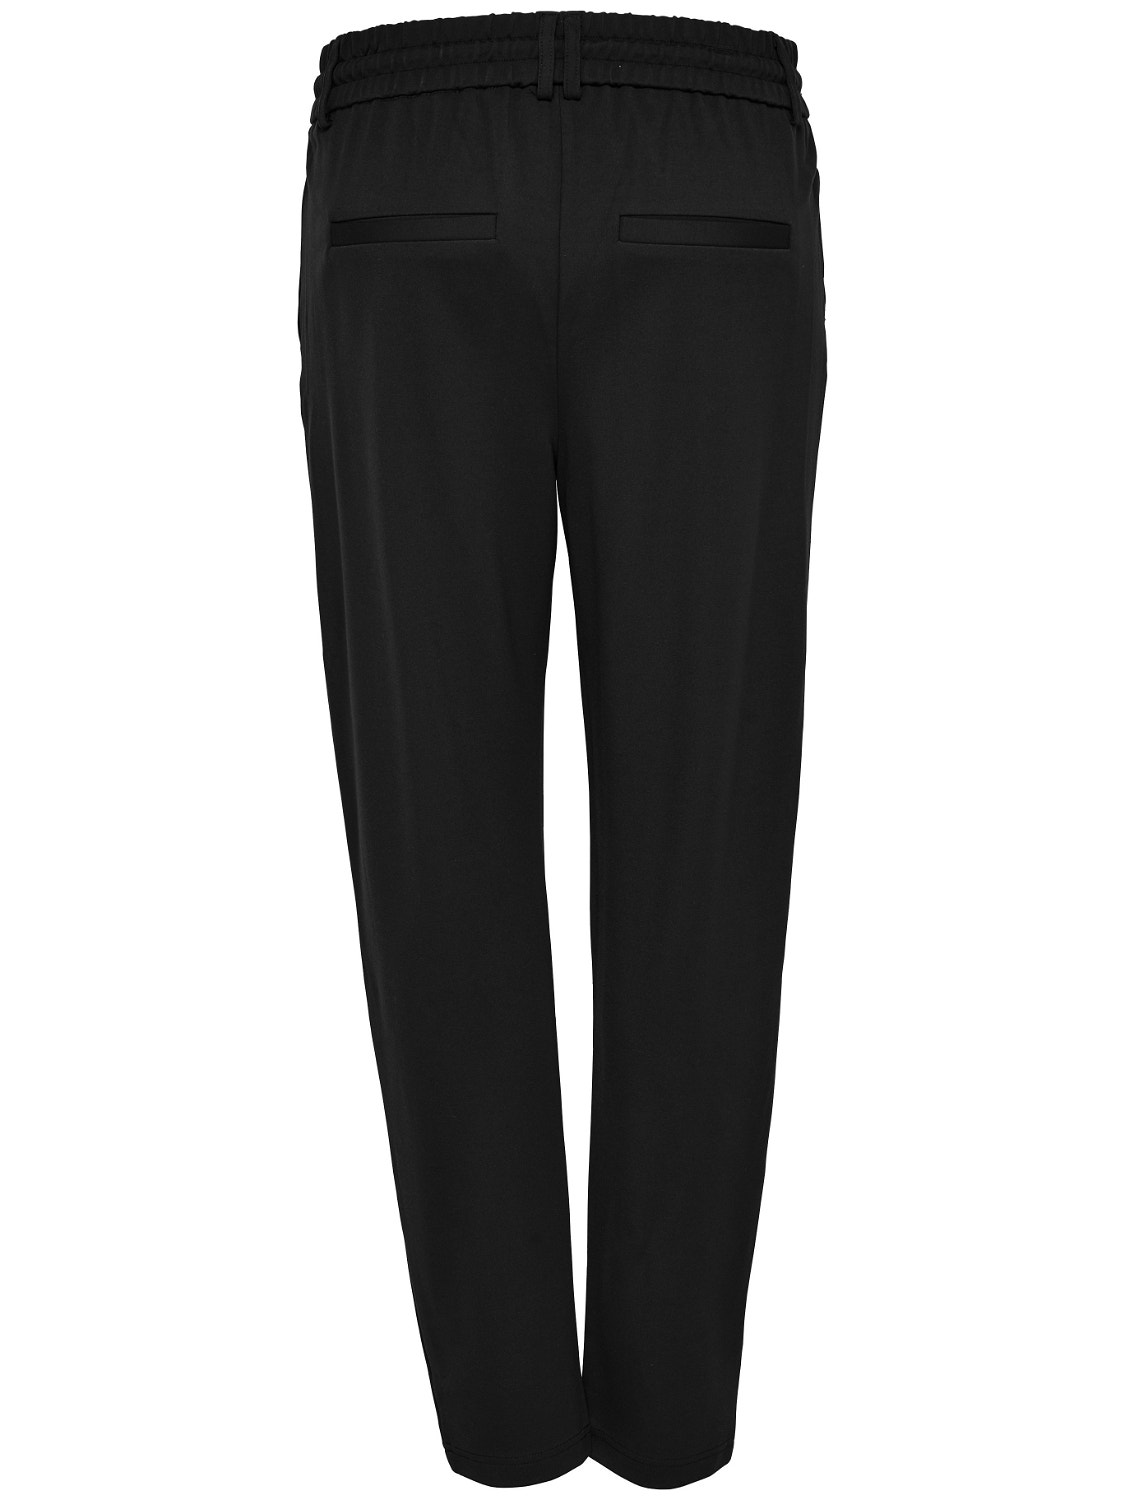 ONLY Poptrash Trousers -Black - 15115847